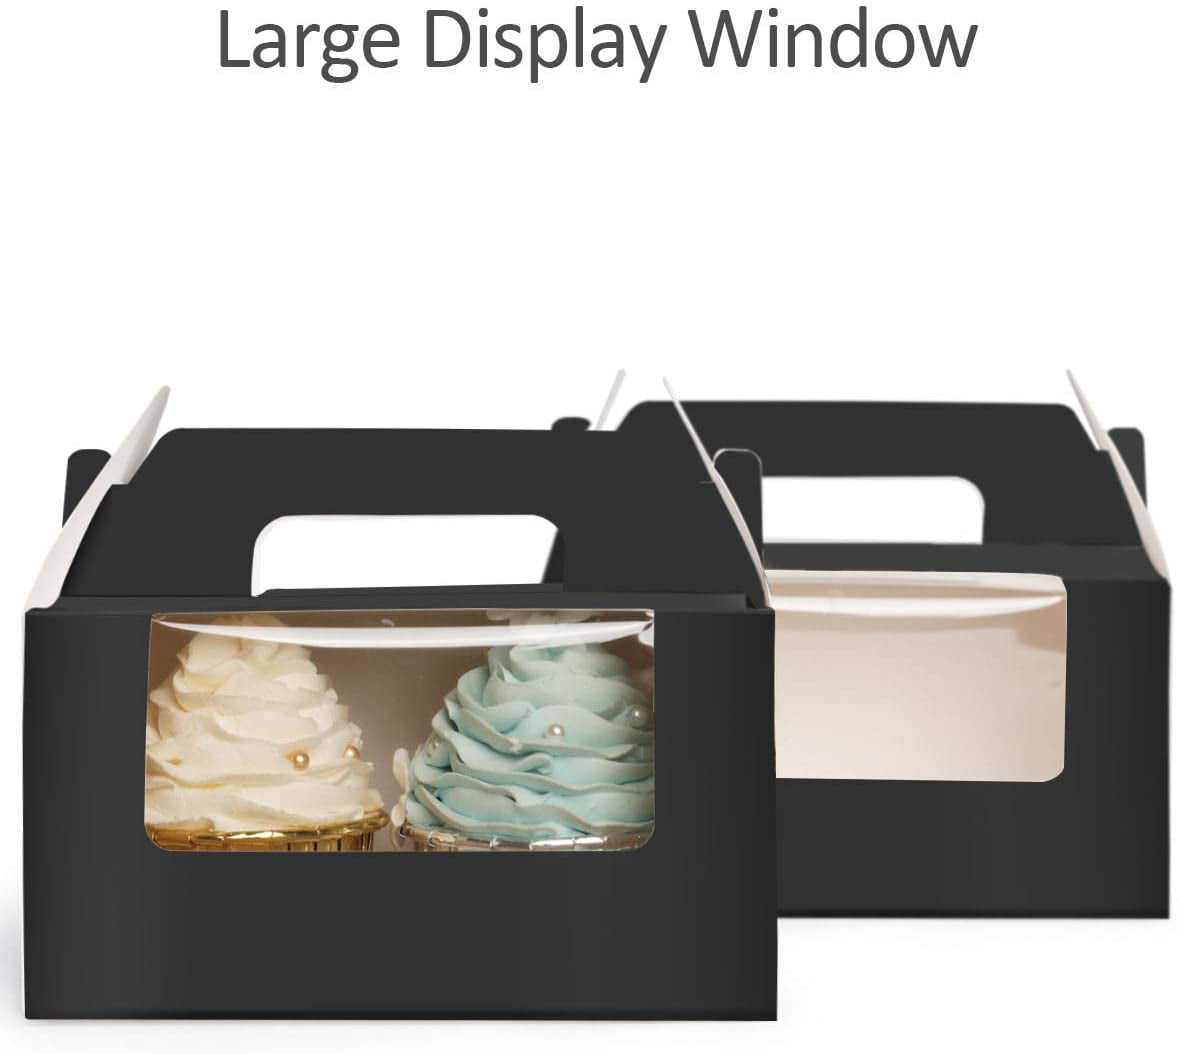 Yotruth White Cupcake Box 2 Holders（25Packs）,6.2 x 3.5 x 3.5 inch Cupcake Carrier with Insert and Display Window Goodies Favor Candy Treat Boxs Muffin Carry Container 